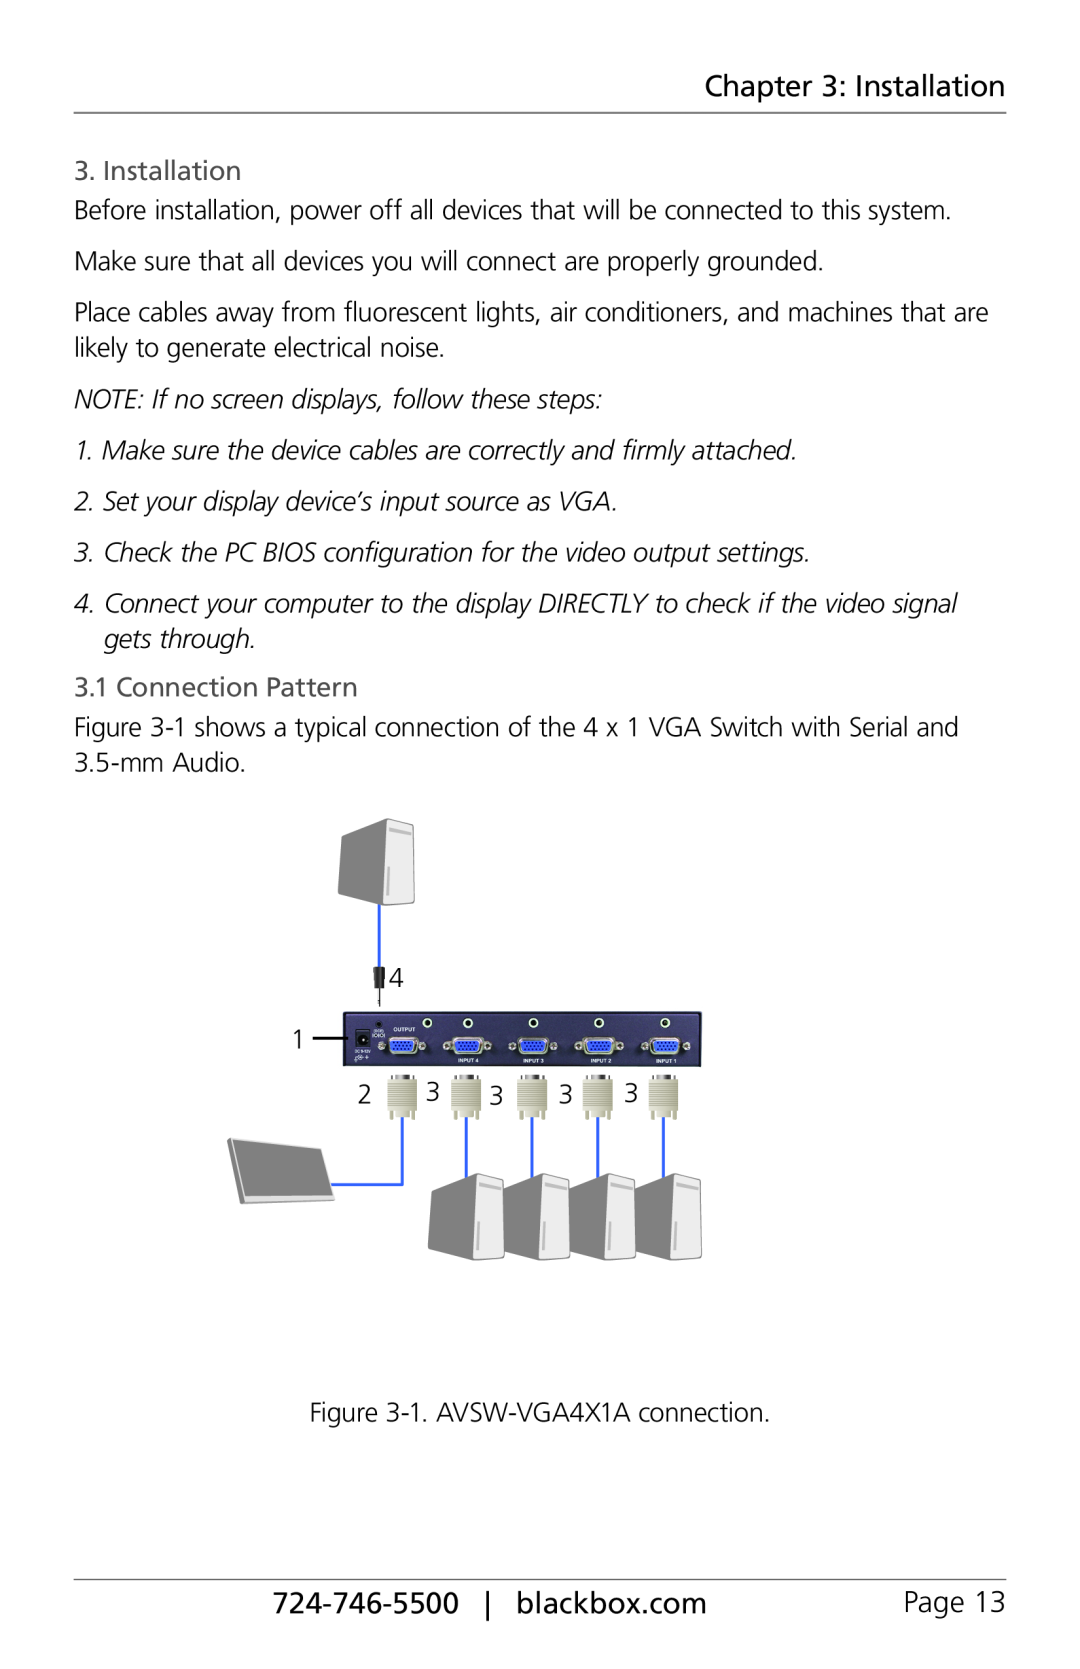 Black Box AVSW-VGA4X1A, AVSW-VGA8X1A manual Installation, NOTE If no screen displays, follow these steps, Connection Pattern 